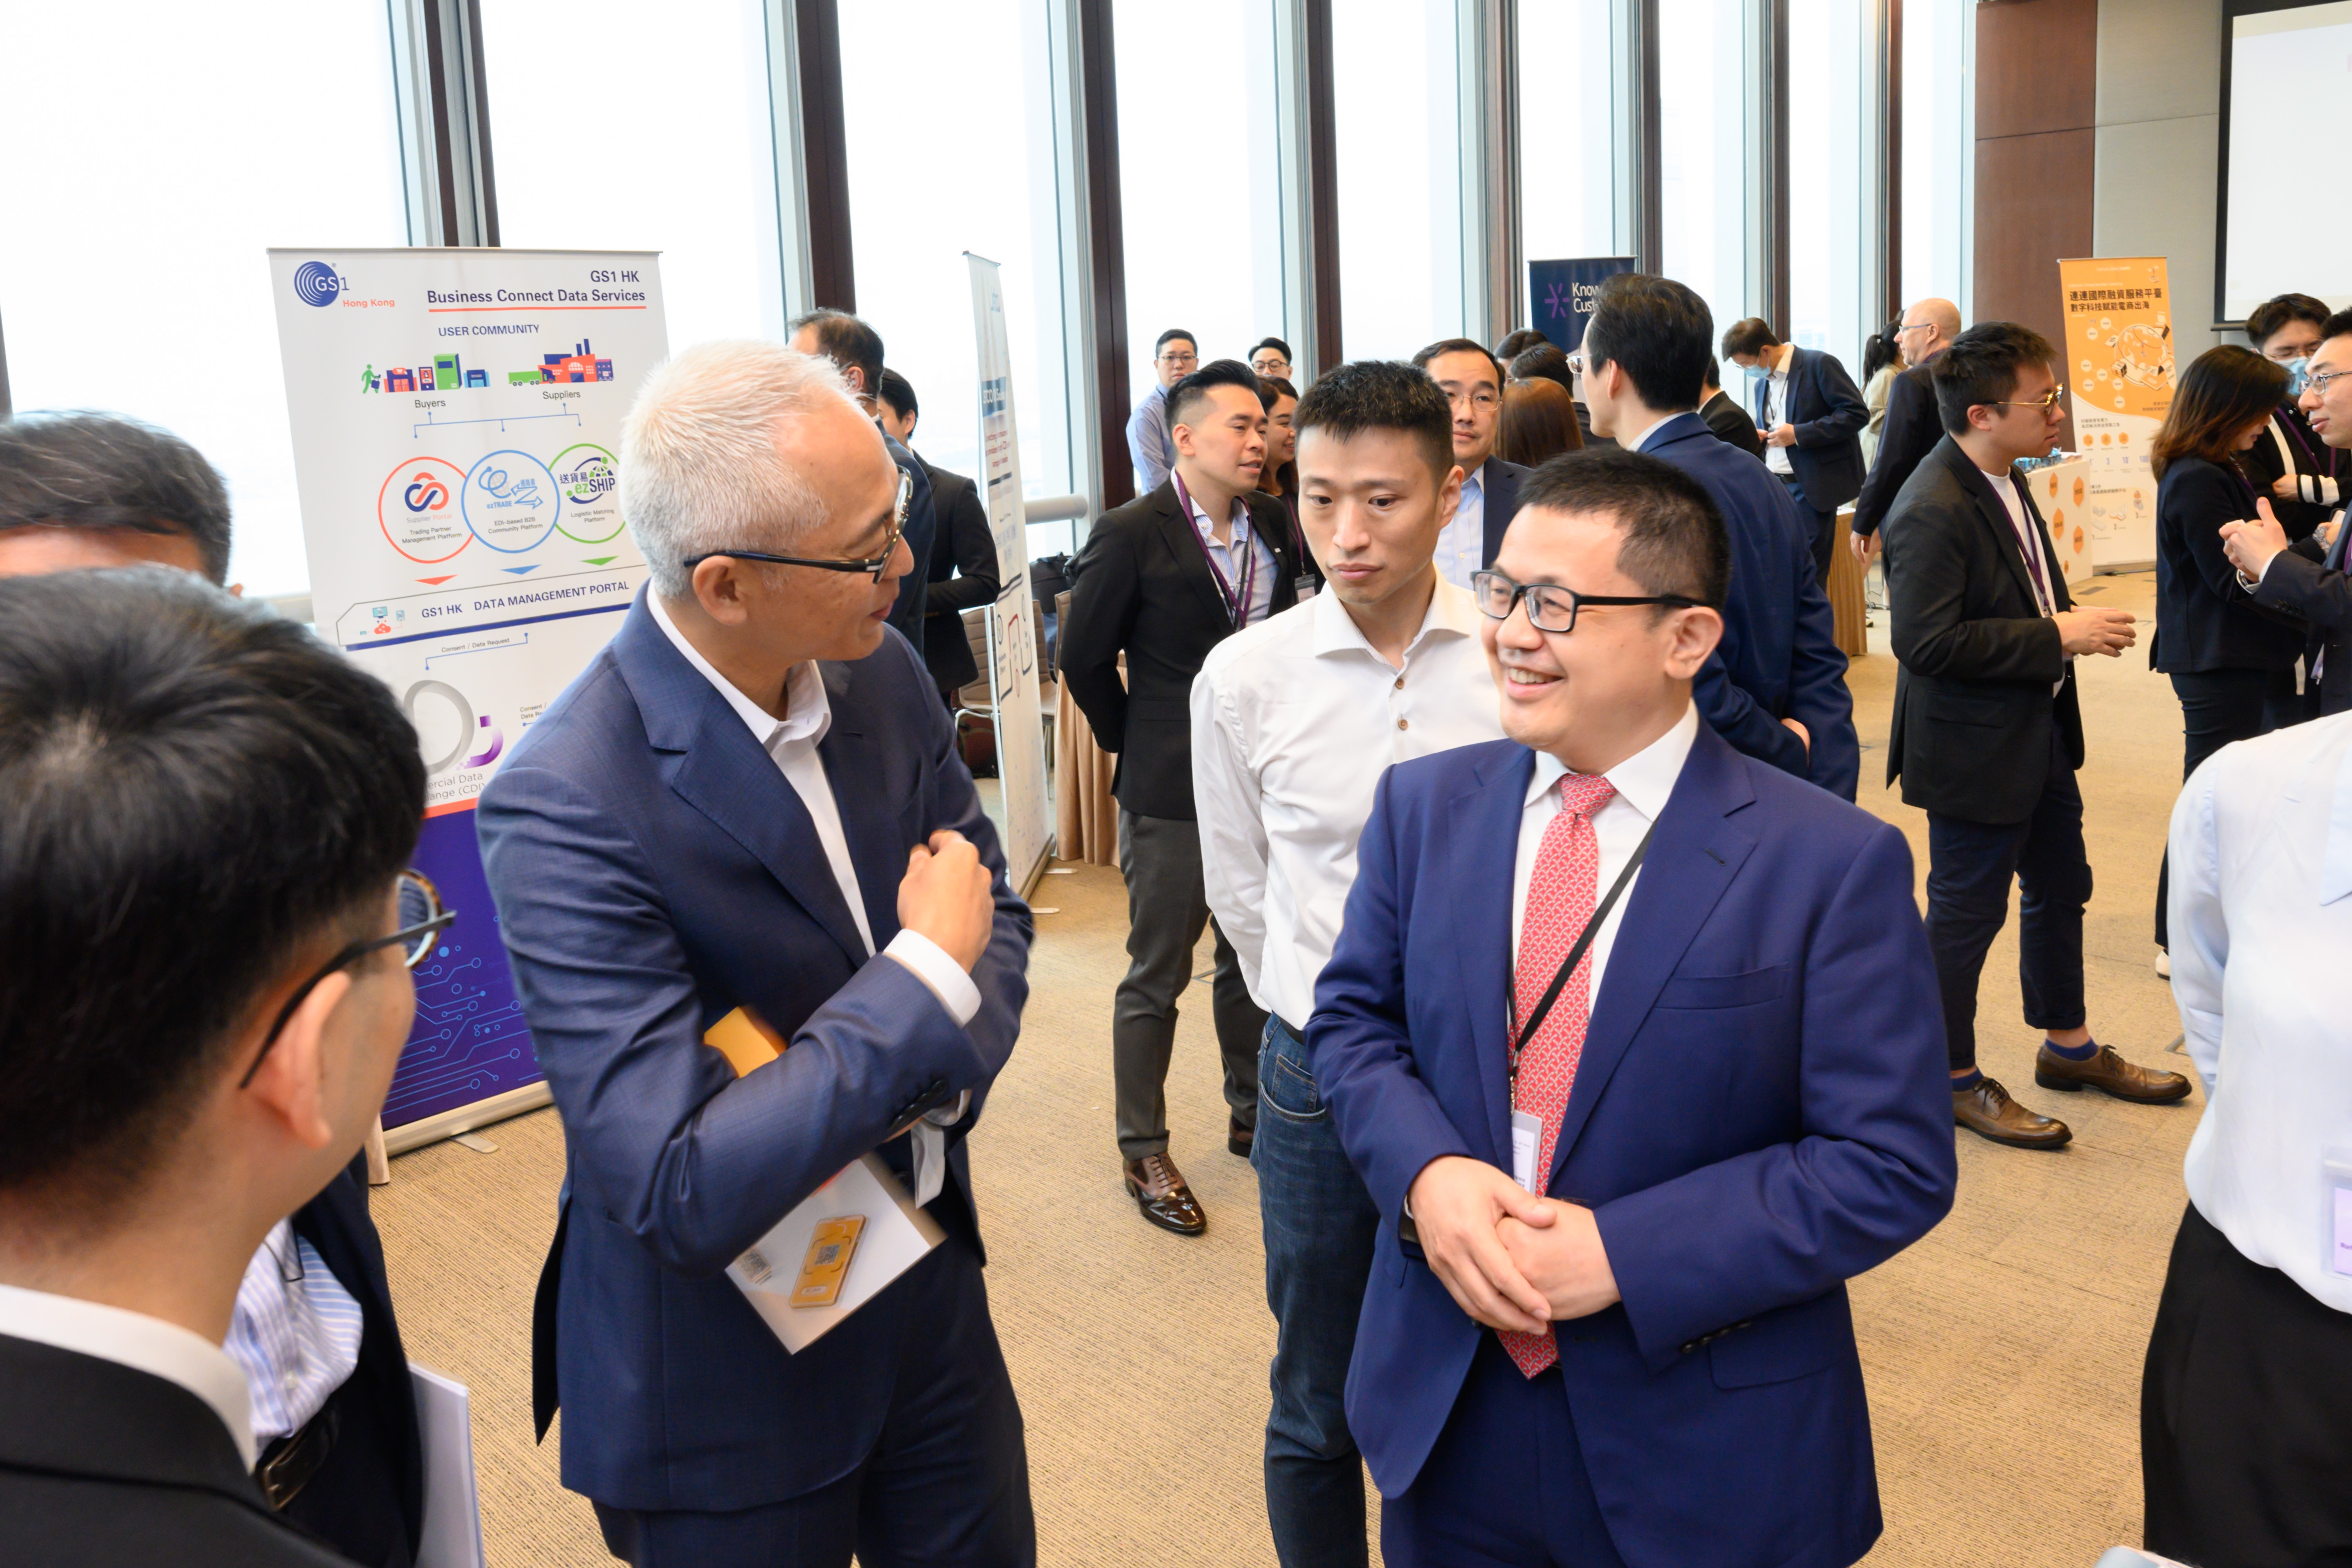 Mr Howard Lee, Deputy Chief Executive of the HKMA, visits the booths set up by various data analytics service providers and data providers at the Summit.